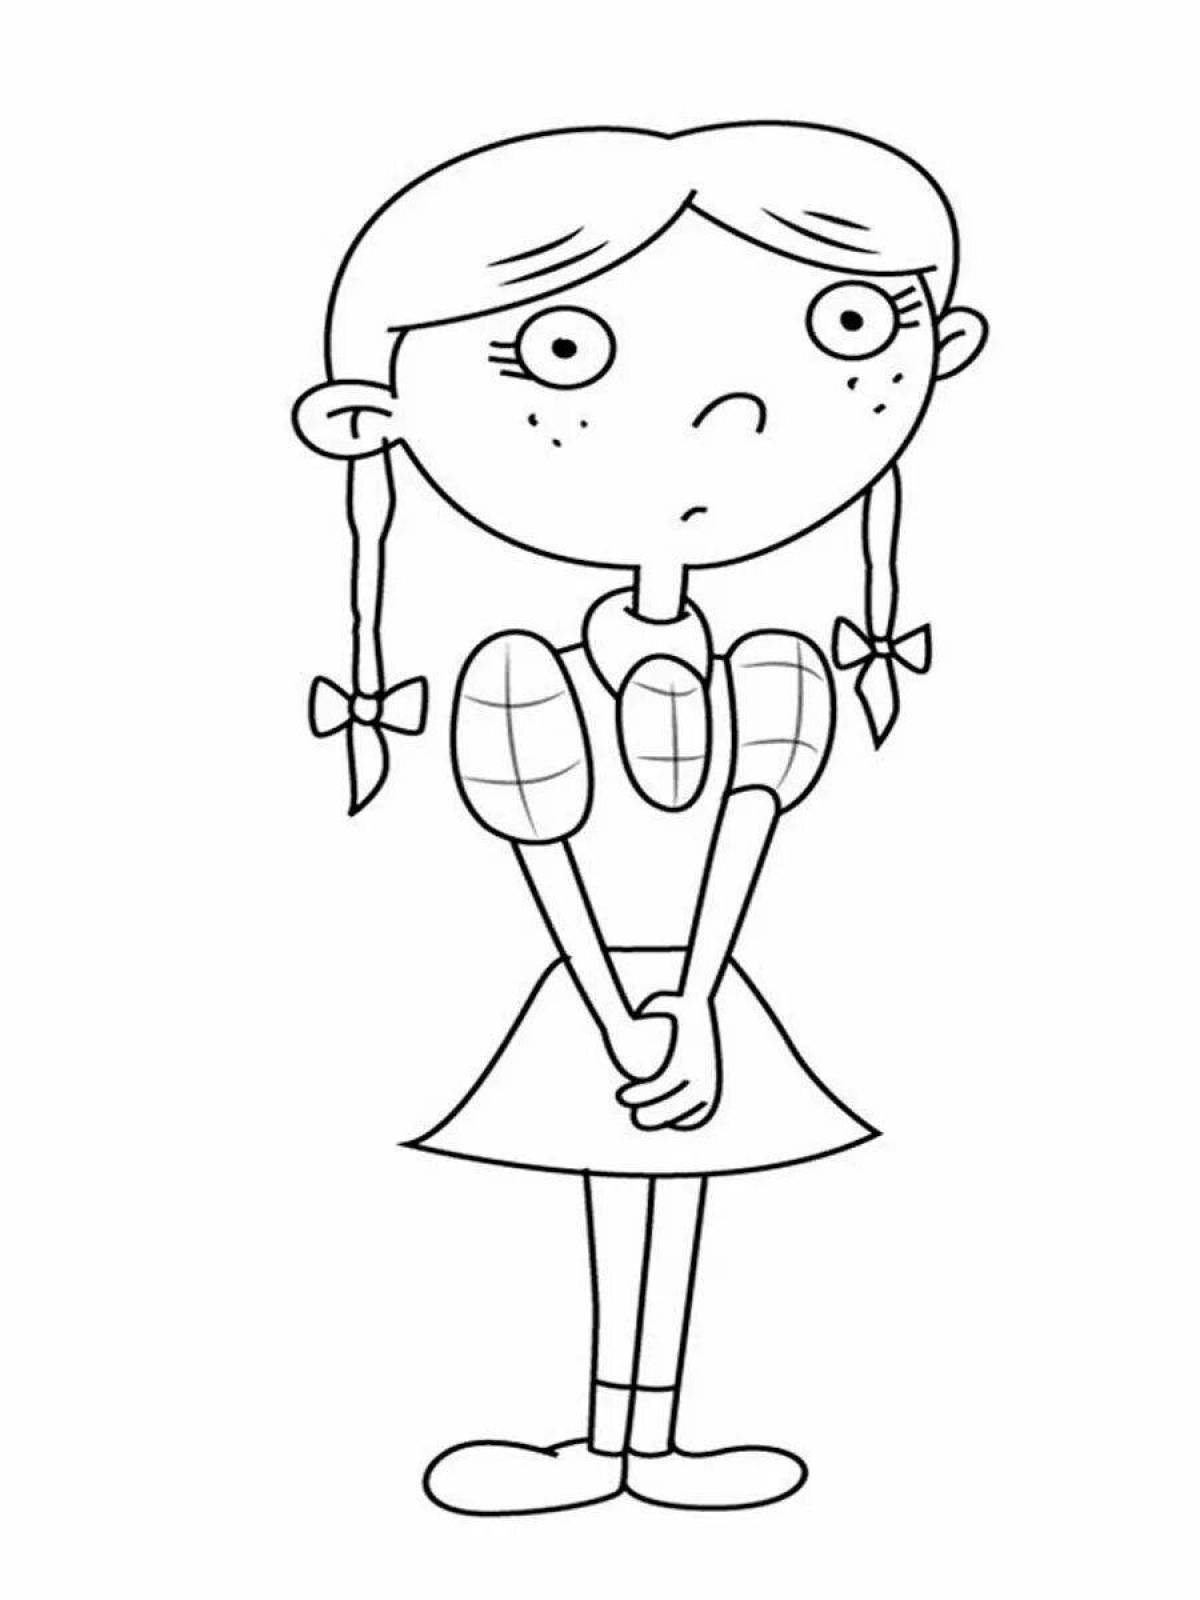 Fun hey, arnold coloring page